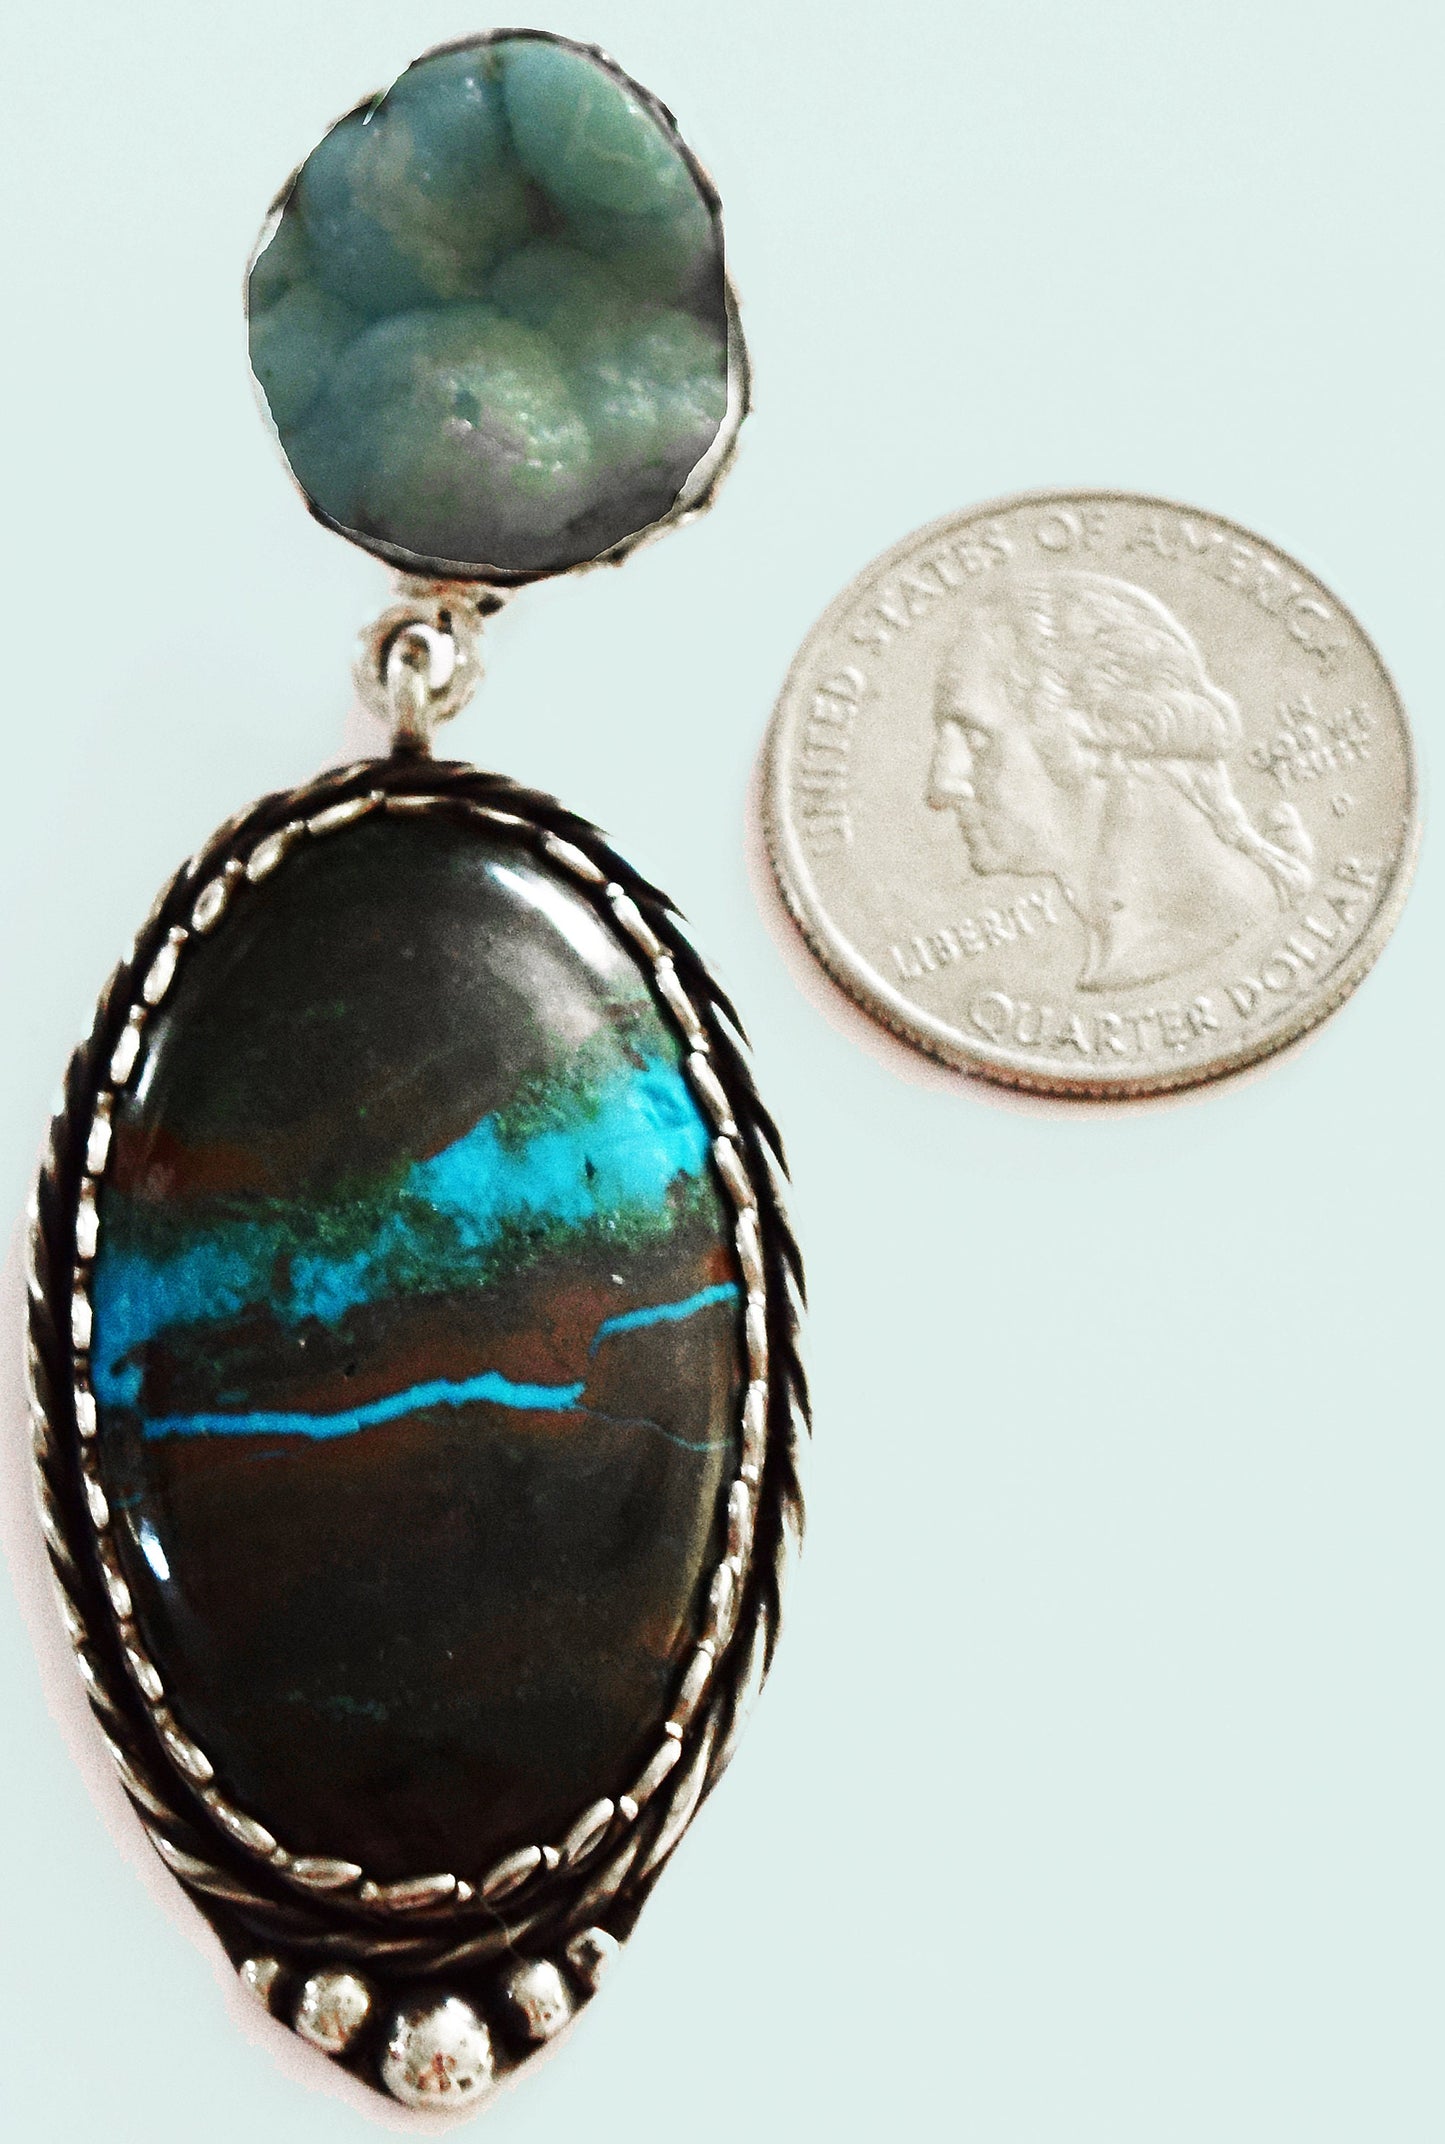 Have you ever seen Hemimorphite? Here it is!